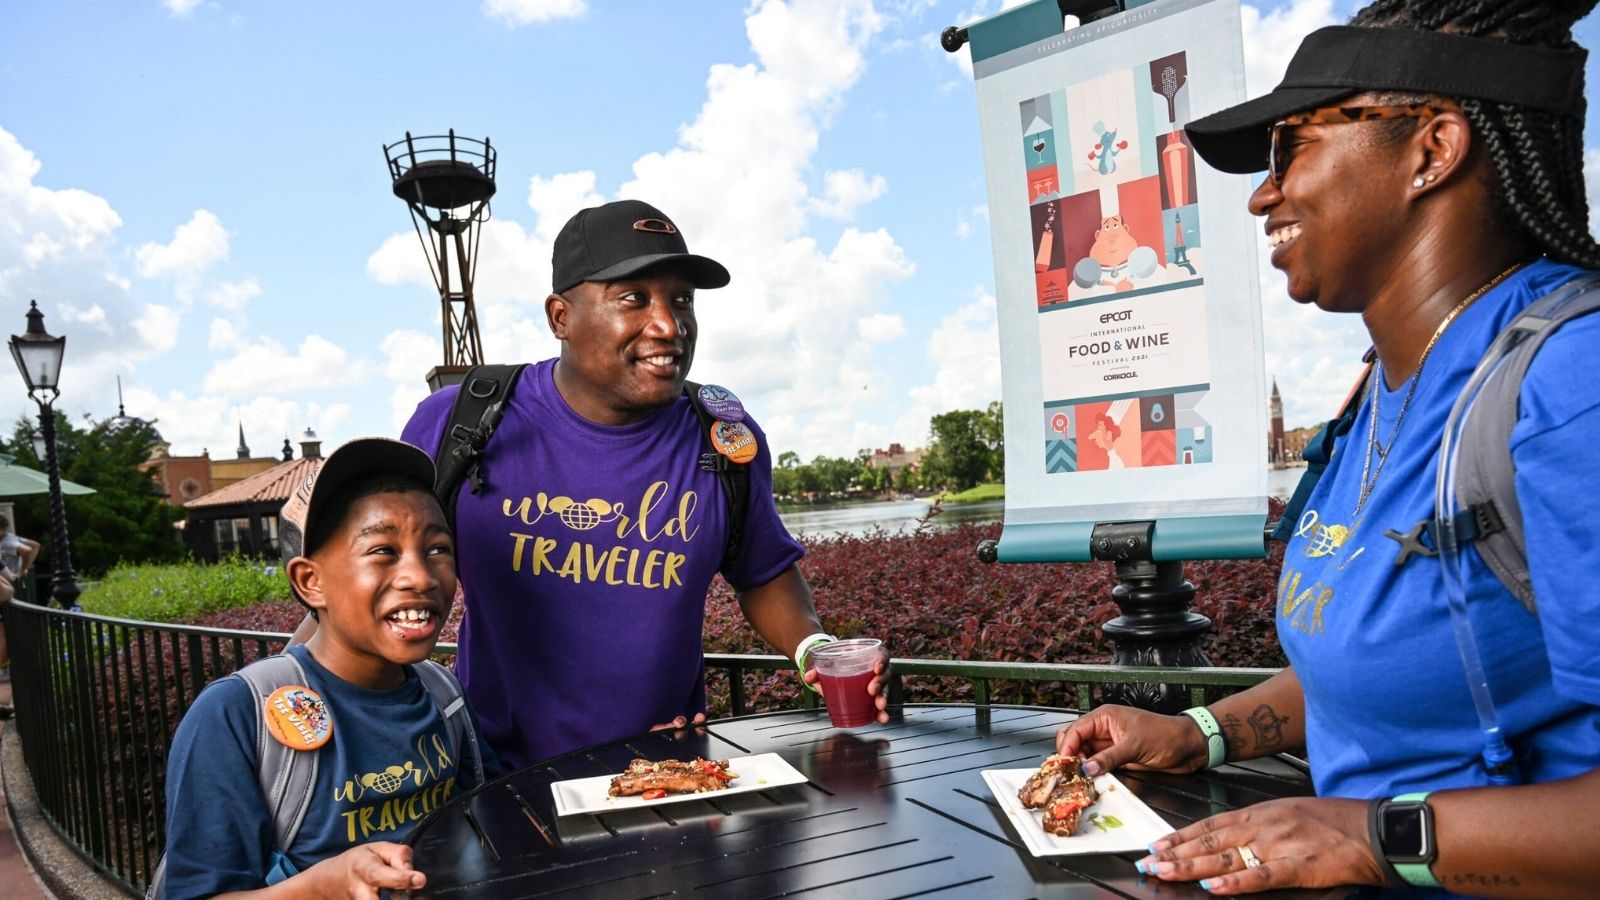 The 2021 EPCOT International Food and Wine serves up 129 days of tasty fun through November 20, 2021 (Photo: Harrison Cooney)